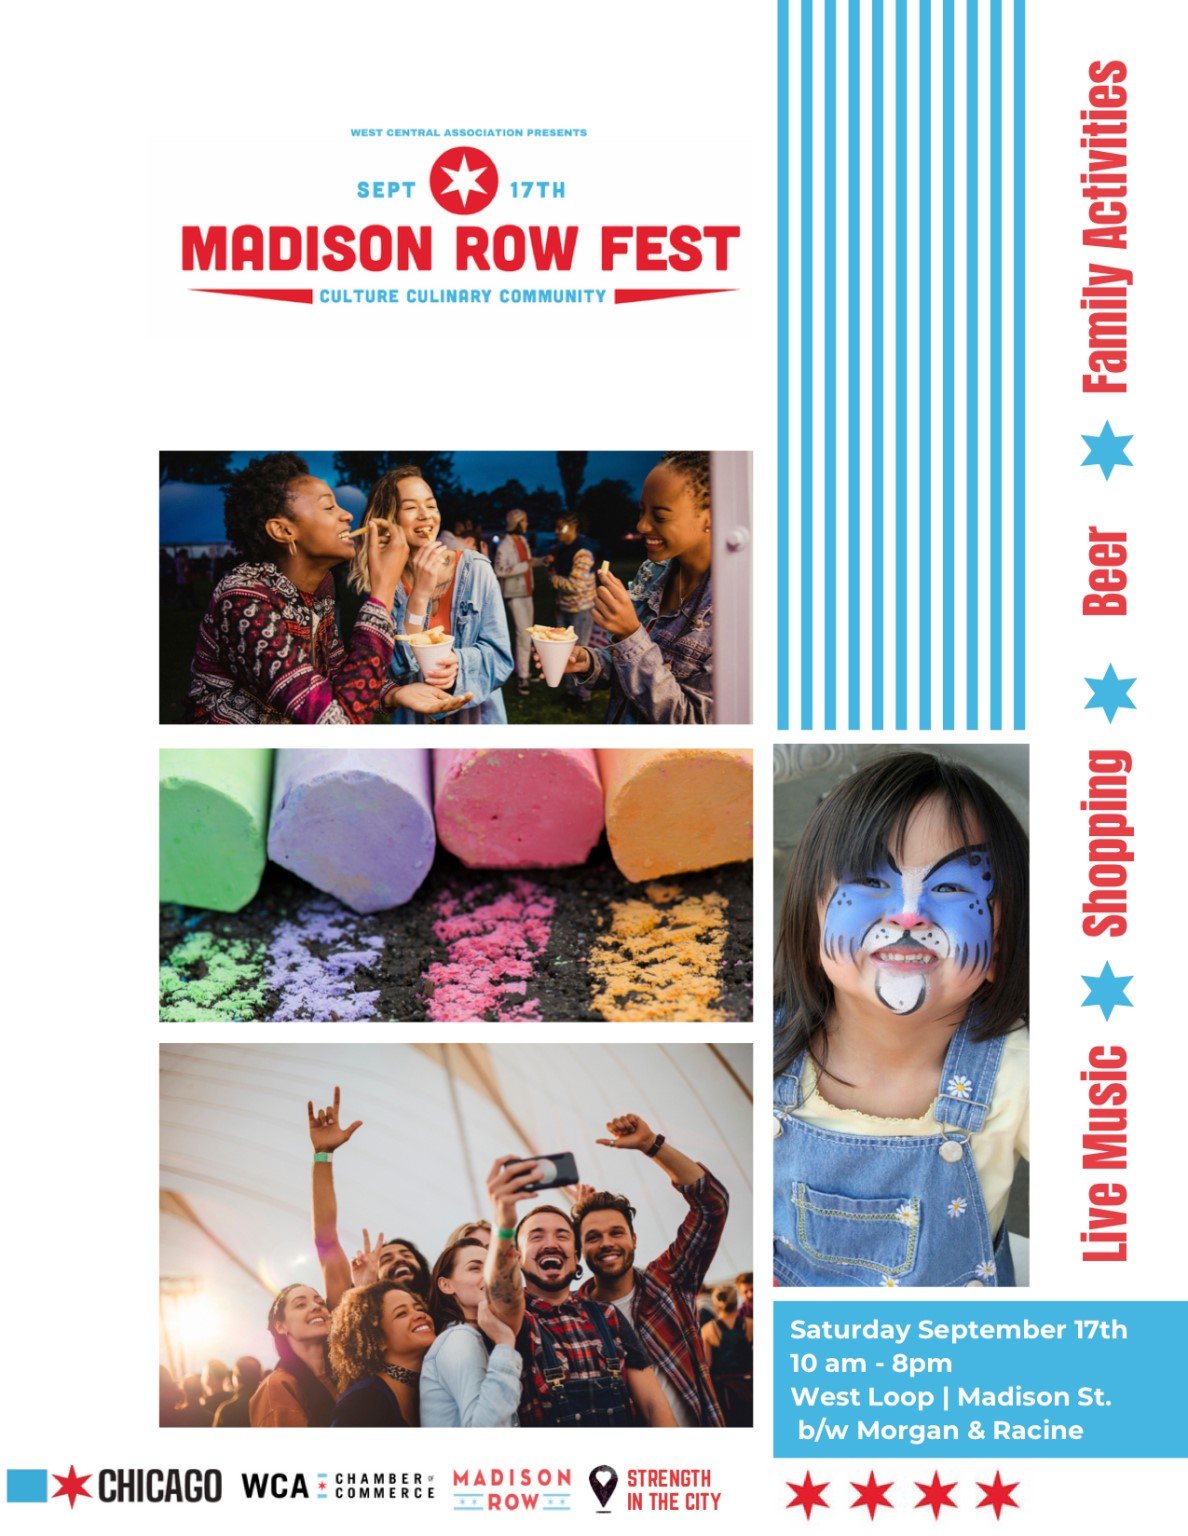 Madison Row Fest - Culture. Culinary. Community. — West Central